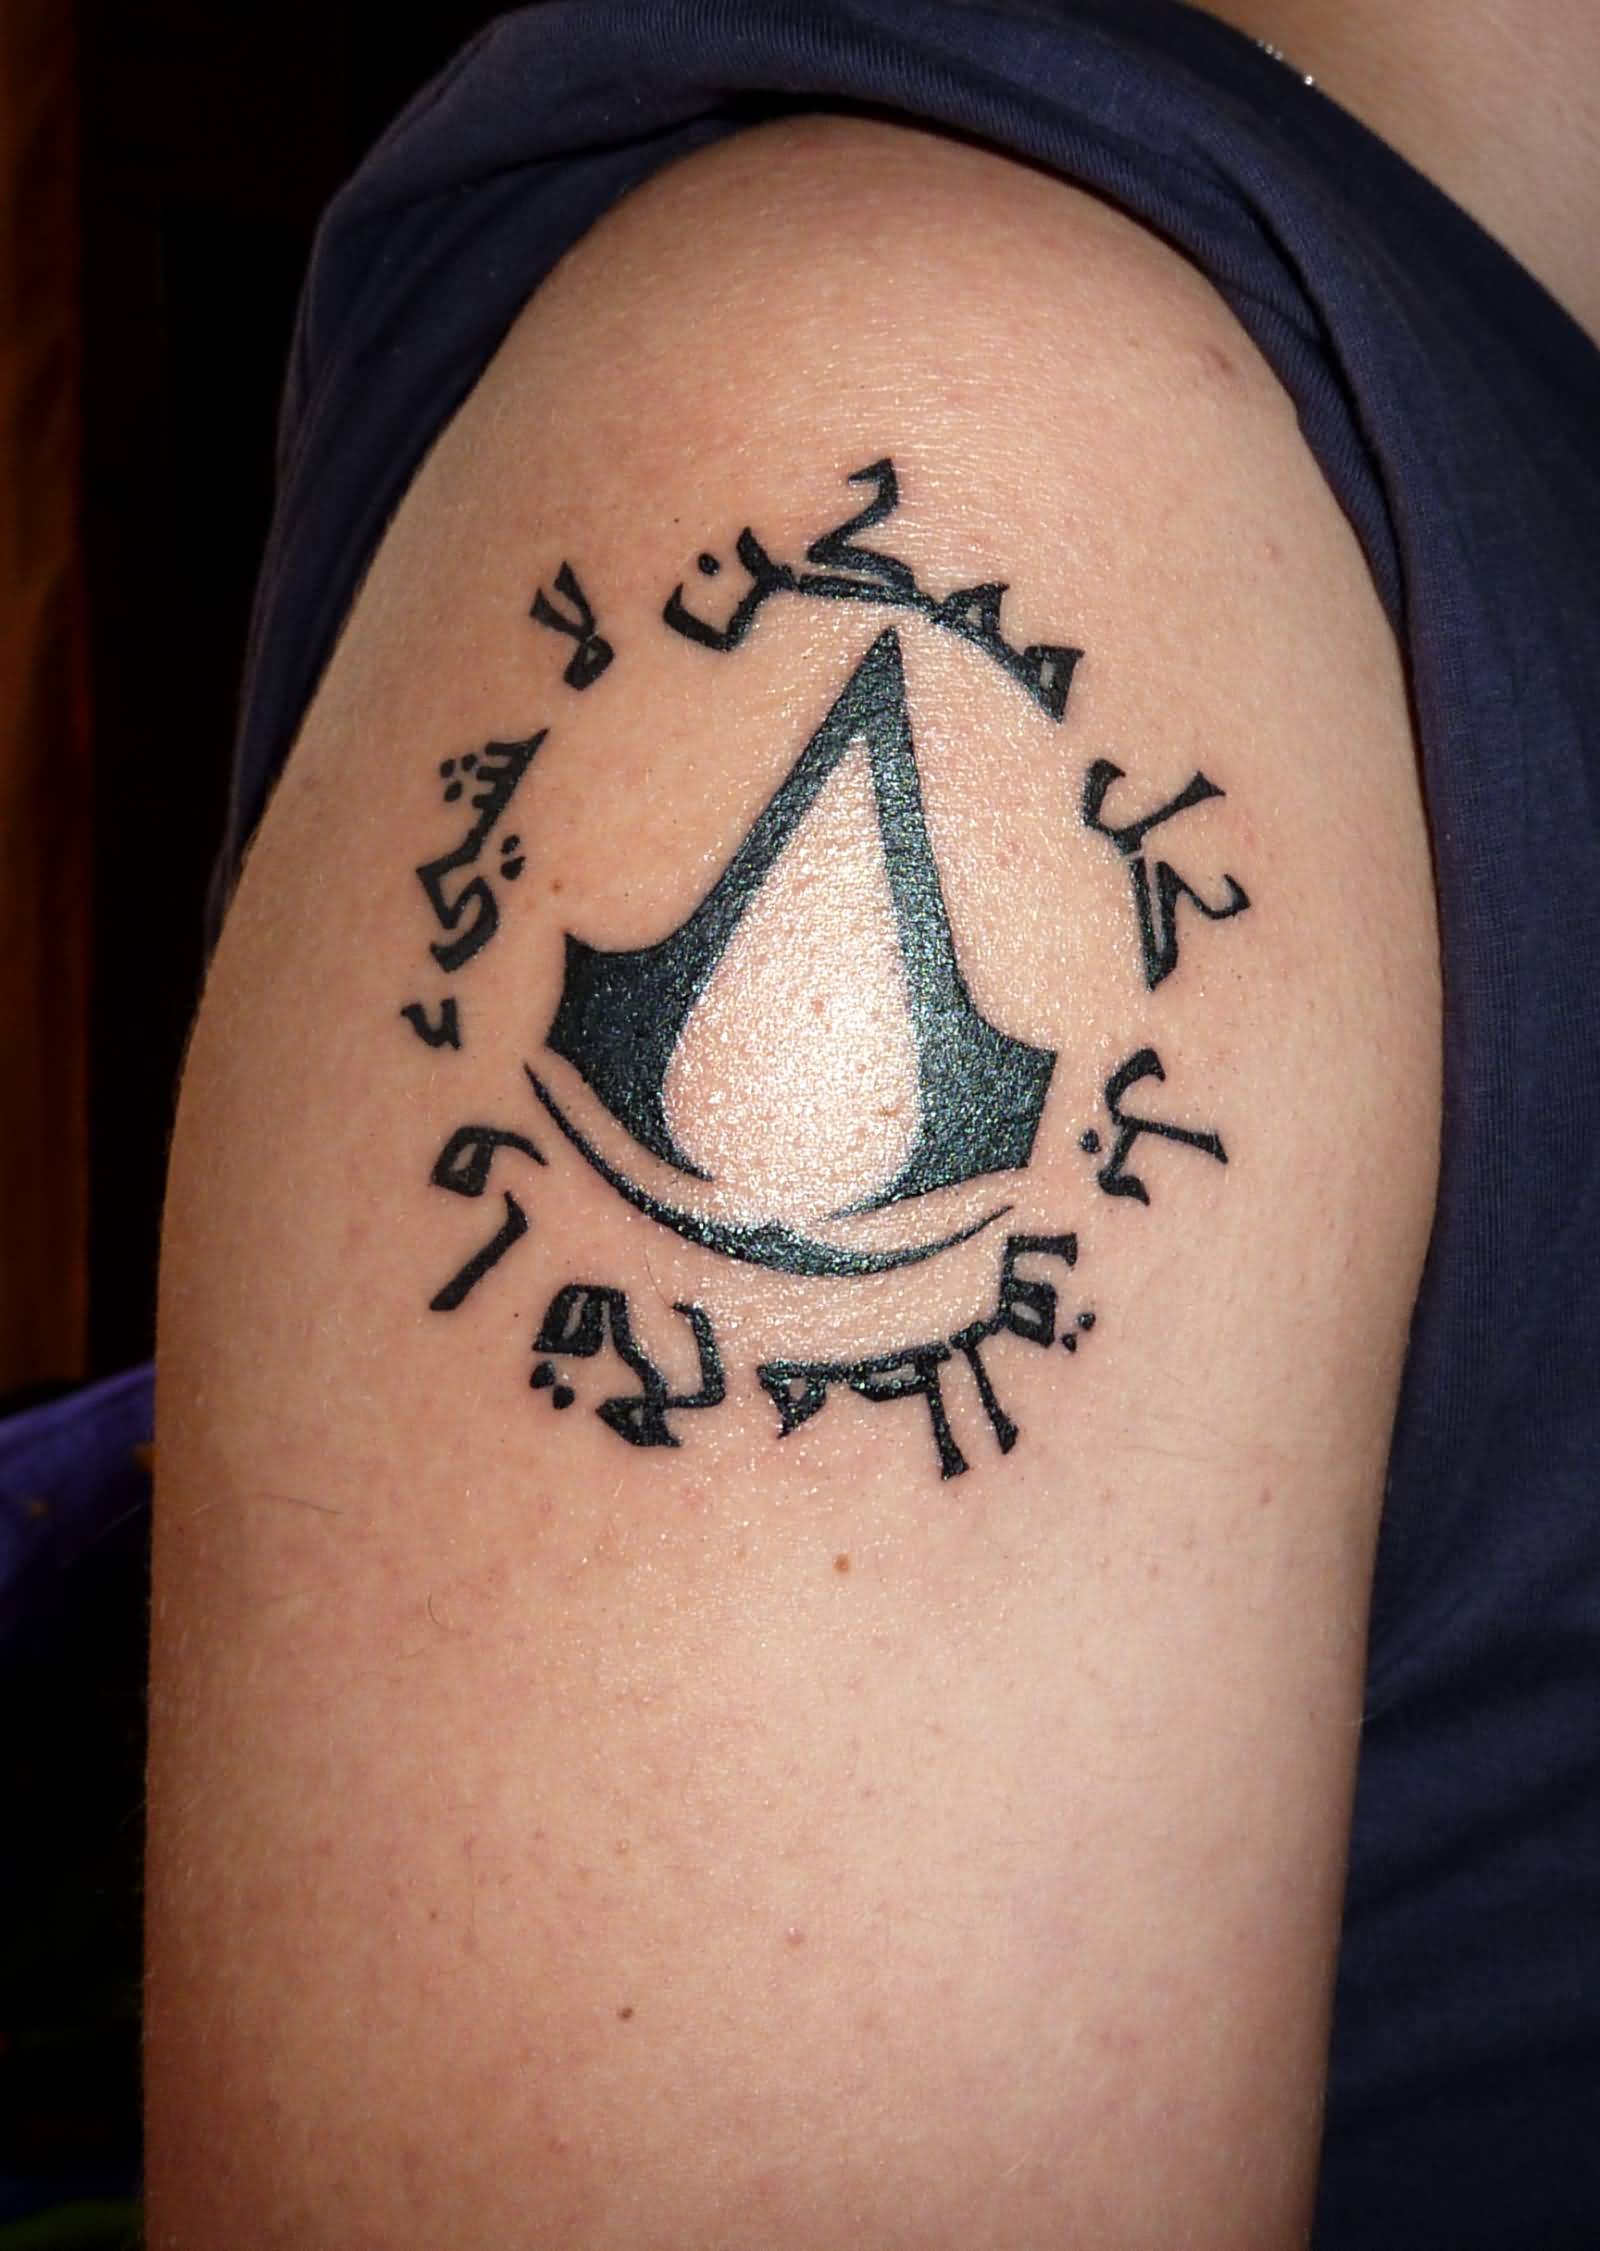 Assassins Creed Tattoo On Shoulder by Zradus